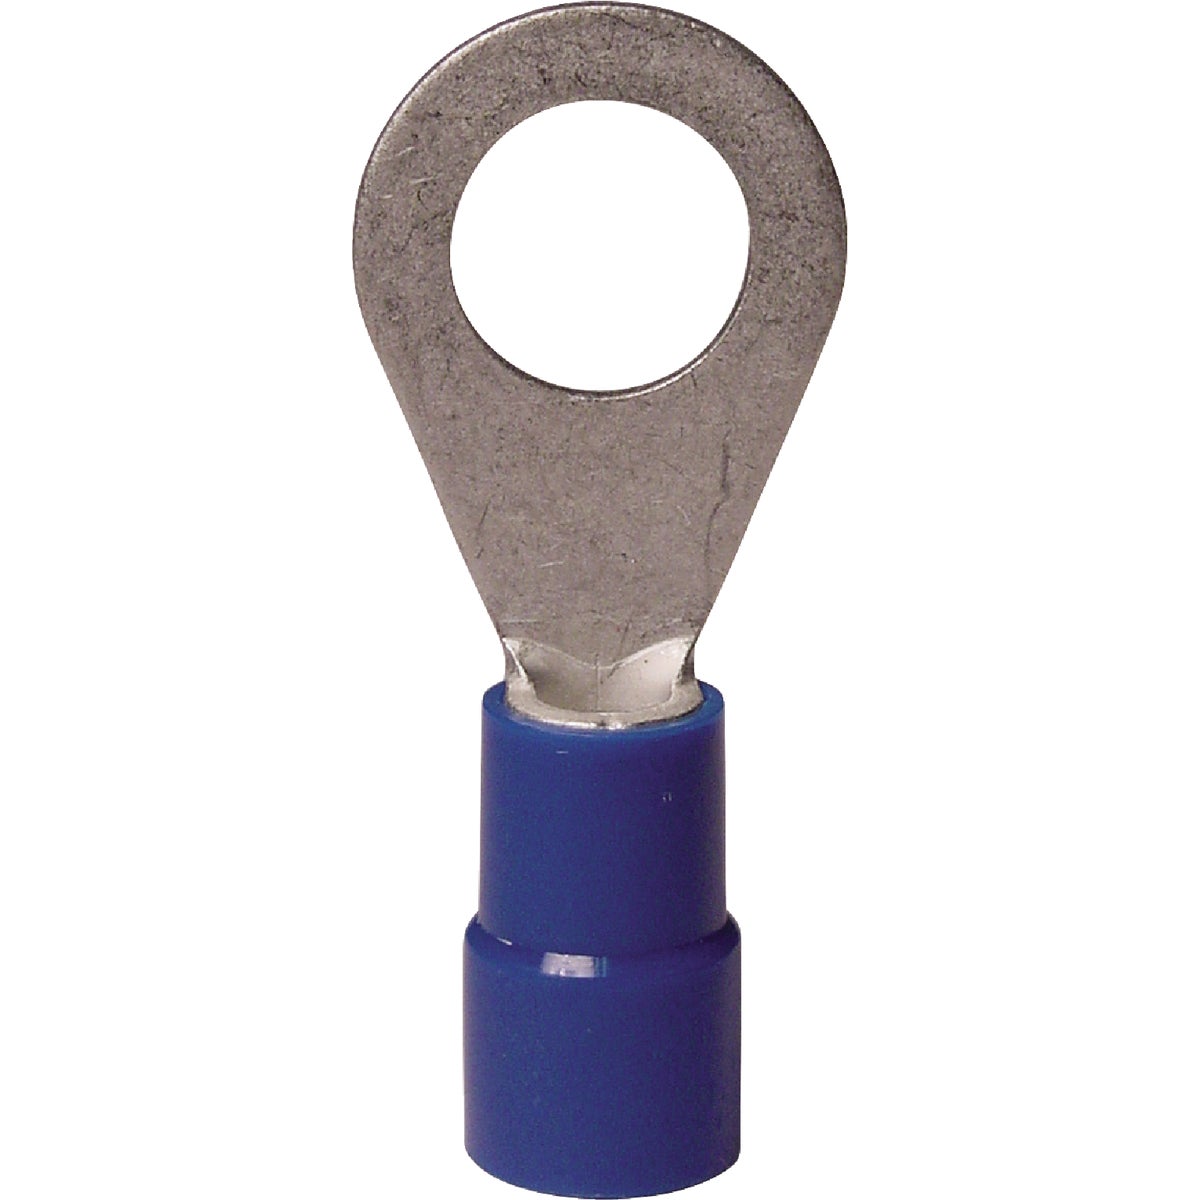 Gardner Bender 16 to 14 AWG #8 to #10 Stud Size Blue Vinyl-Insulated Barrel Ring Terminal (100-Pack)